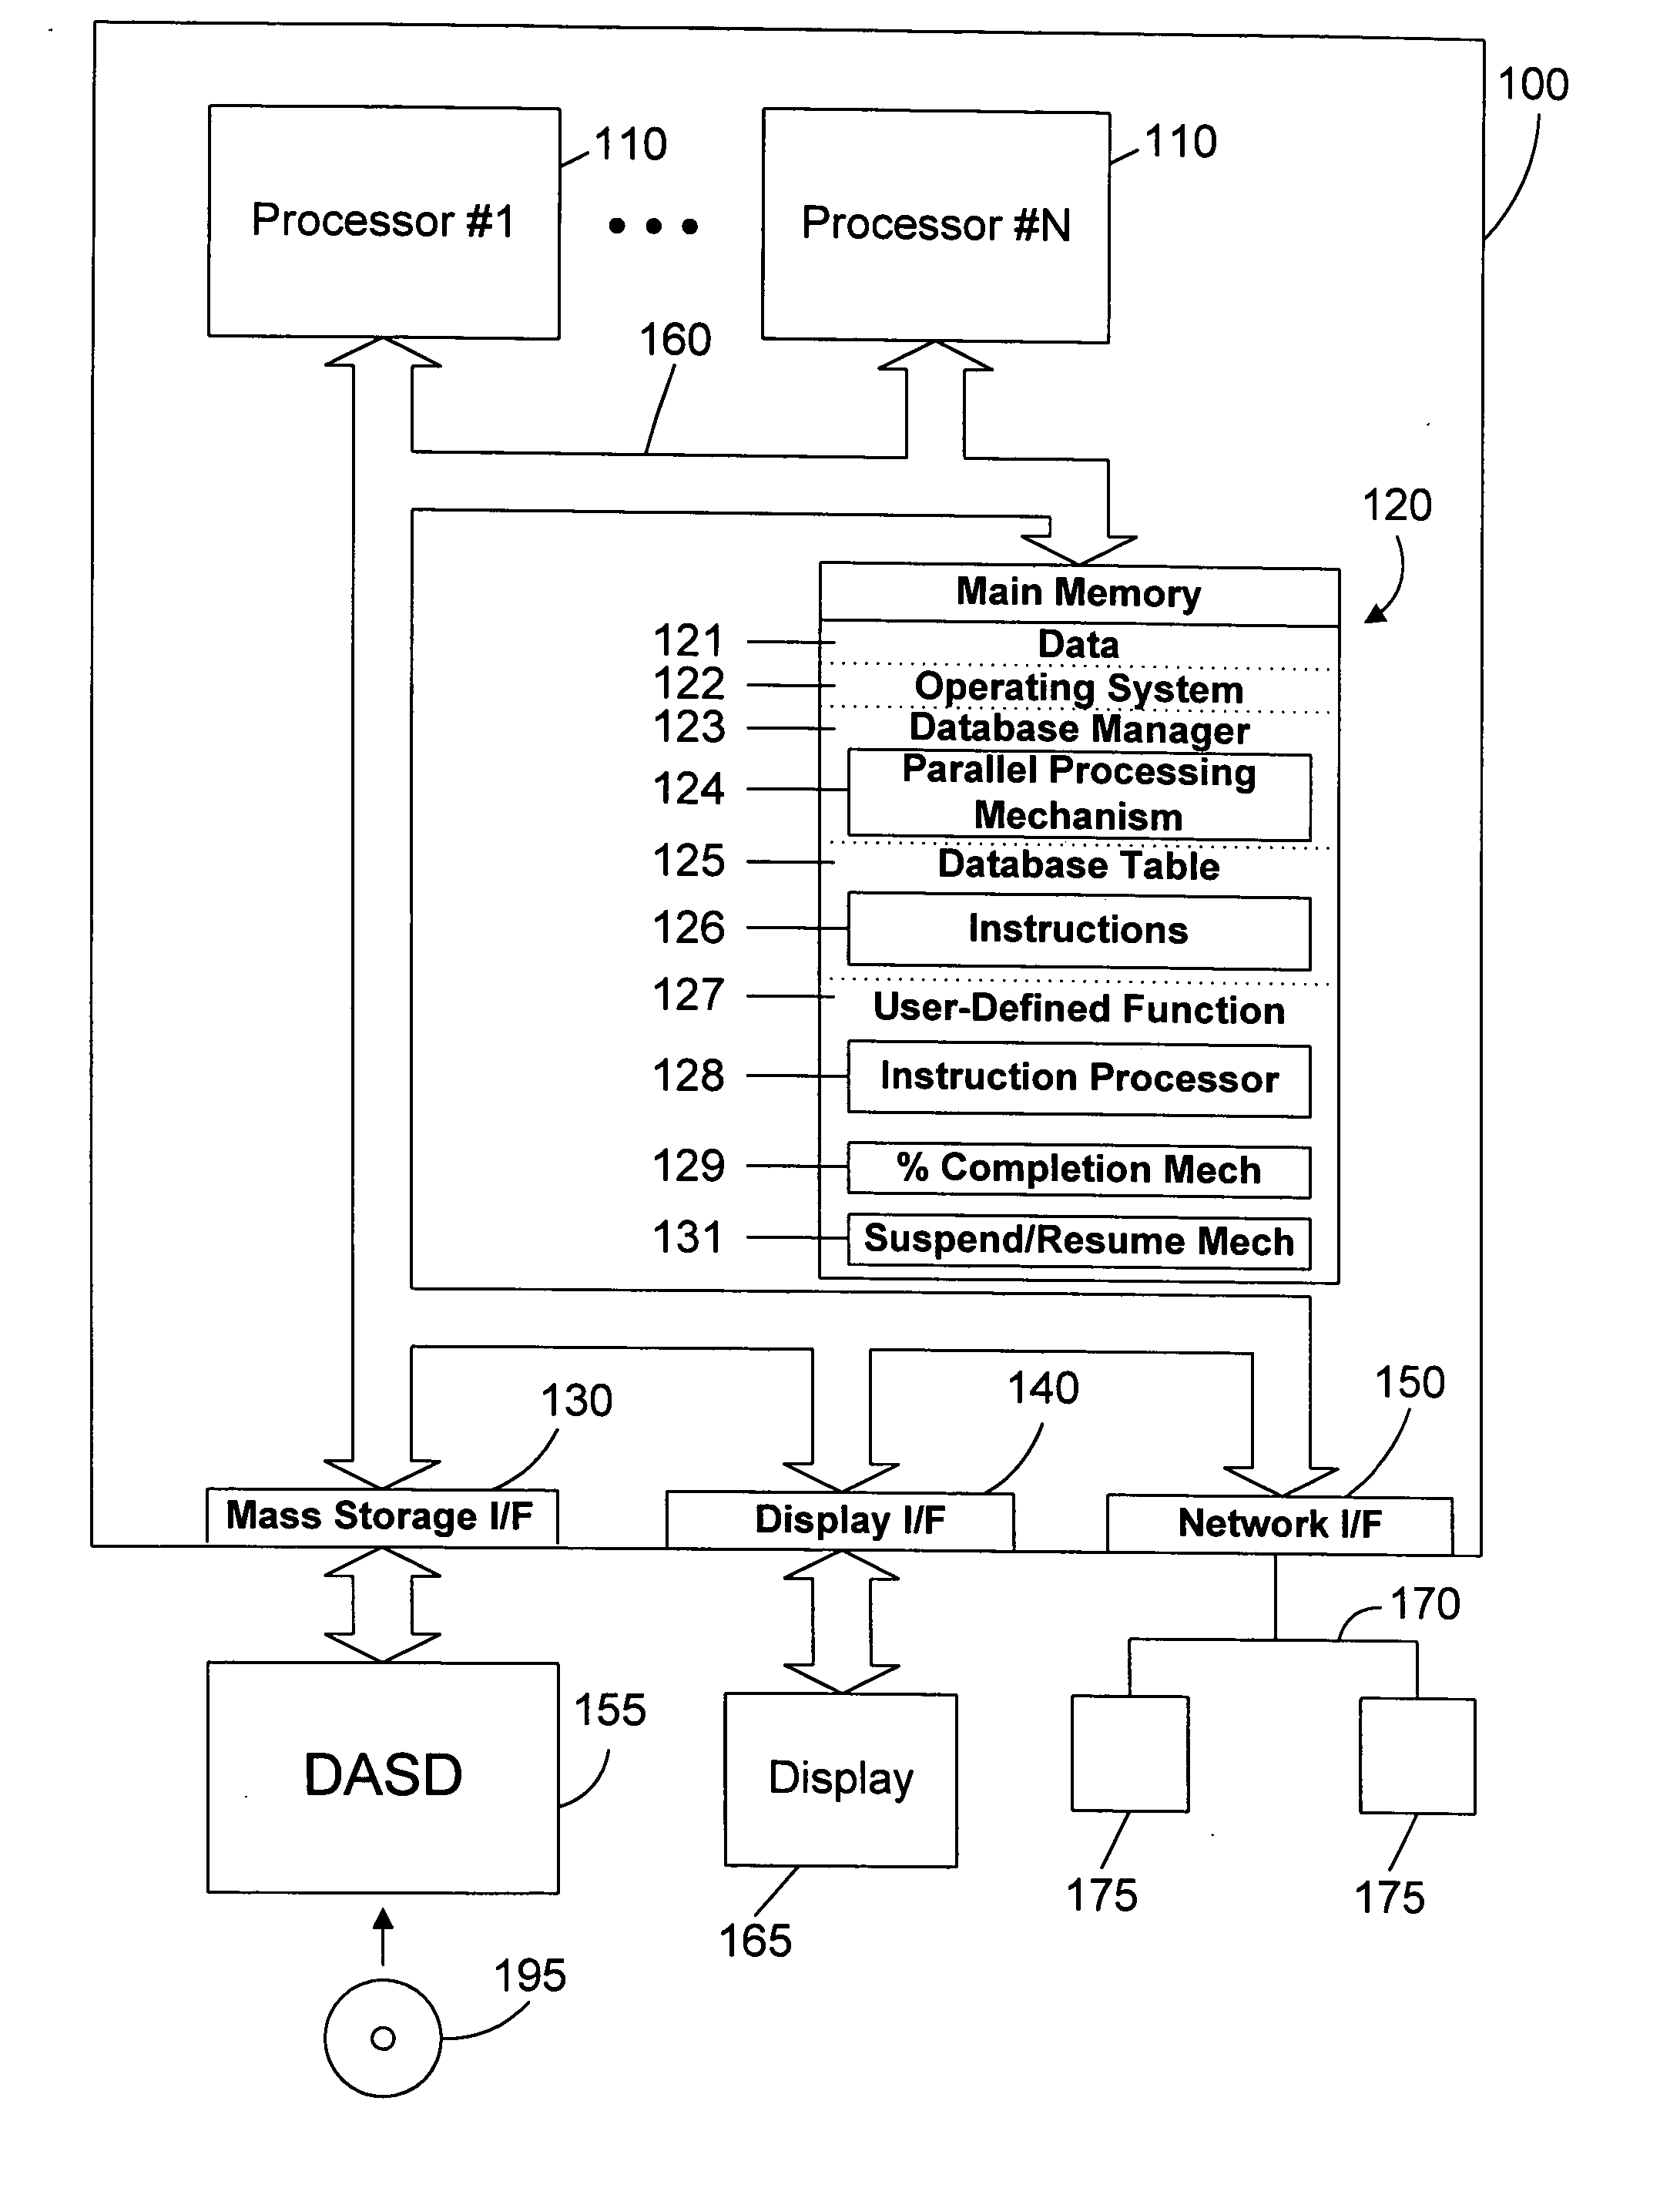 Apparatus and method for enabling parallel processing of a computer program using existing database parallelism